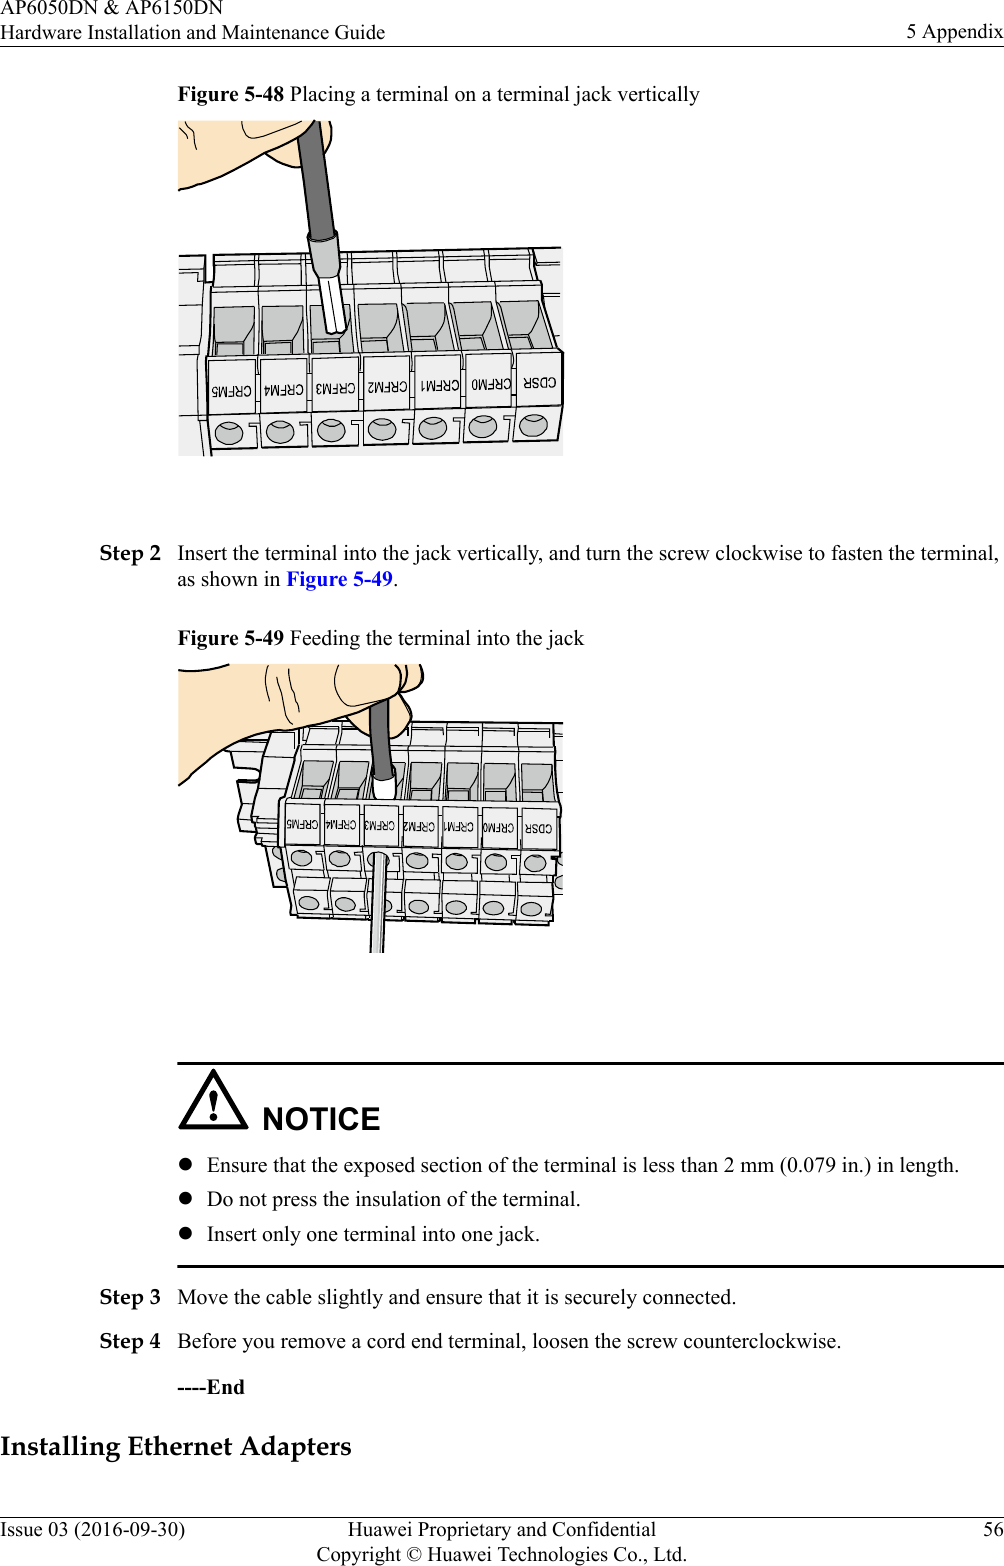 Figure 5-48 Placing a terminal on a terminal jack vertically Step 2 Insert the terminal into the jack vertically, and turn the screw clockwise to fasten the terminal,as shown in Figure 5-49.Figure 5-49 Feeding the terminal into the jack NOTICElEnsure that the exposed section of the terminal is less than 2 mm (0.079 in.) in length.lDo not press the insulation of the terminal.lInsert only one terminal into one jack.Step 3 Move the cable slightly and ensure that it is securely connected.Step 4 Before you remove a cord end terminal, loosen the screw counterclockwise.----EndInstalling Ethernet AdaptersAP6050DN &amp; AP6150DNHardware Installation and Maintenance Guide 5 AppendixIssue 03 (2016-09-30) Huawei Proprietary and ConfidentialCopyright © Huawei Technologies Co., Ltd.56